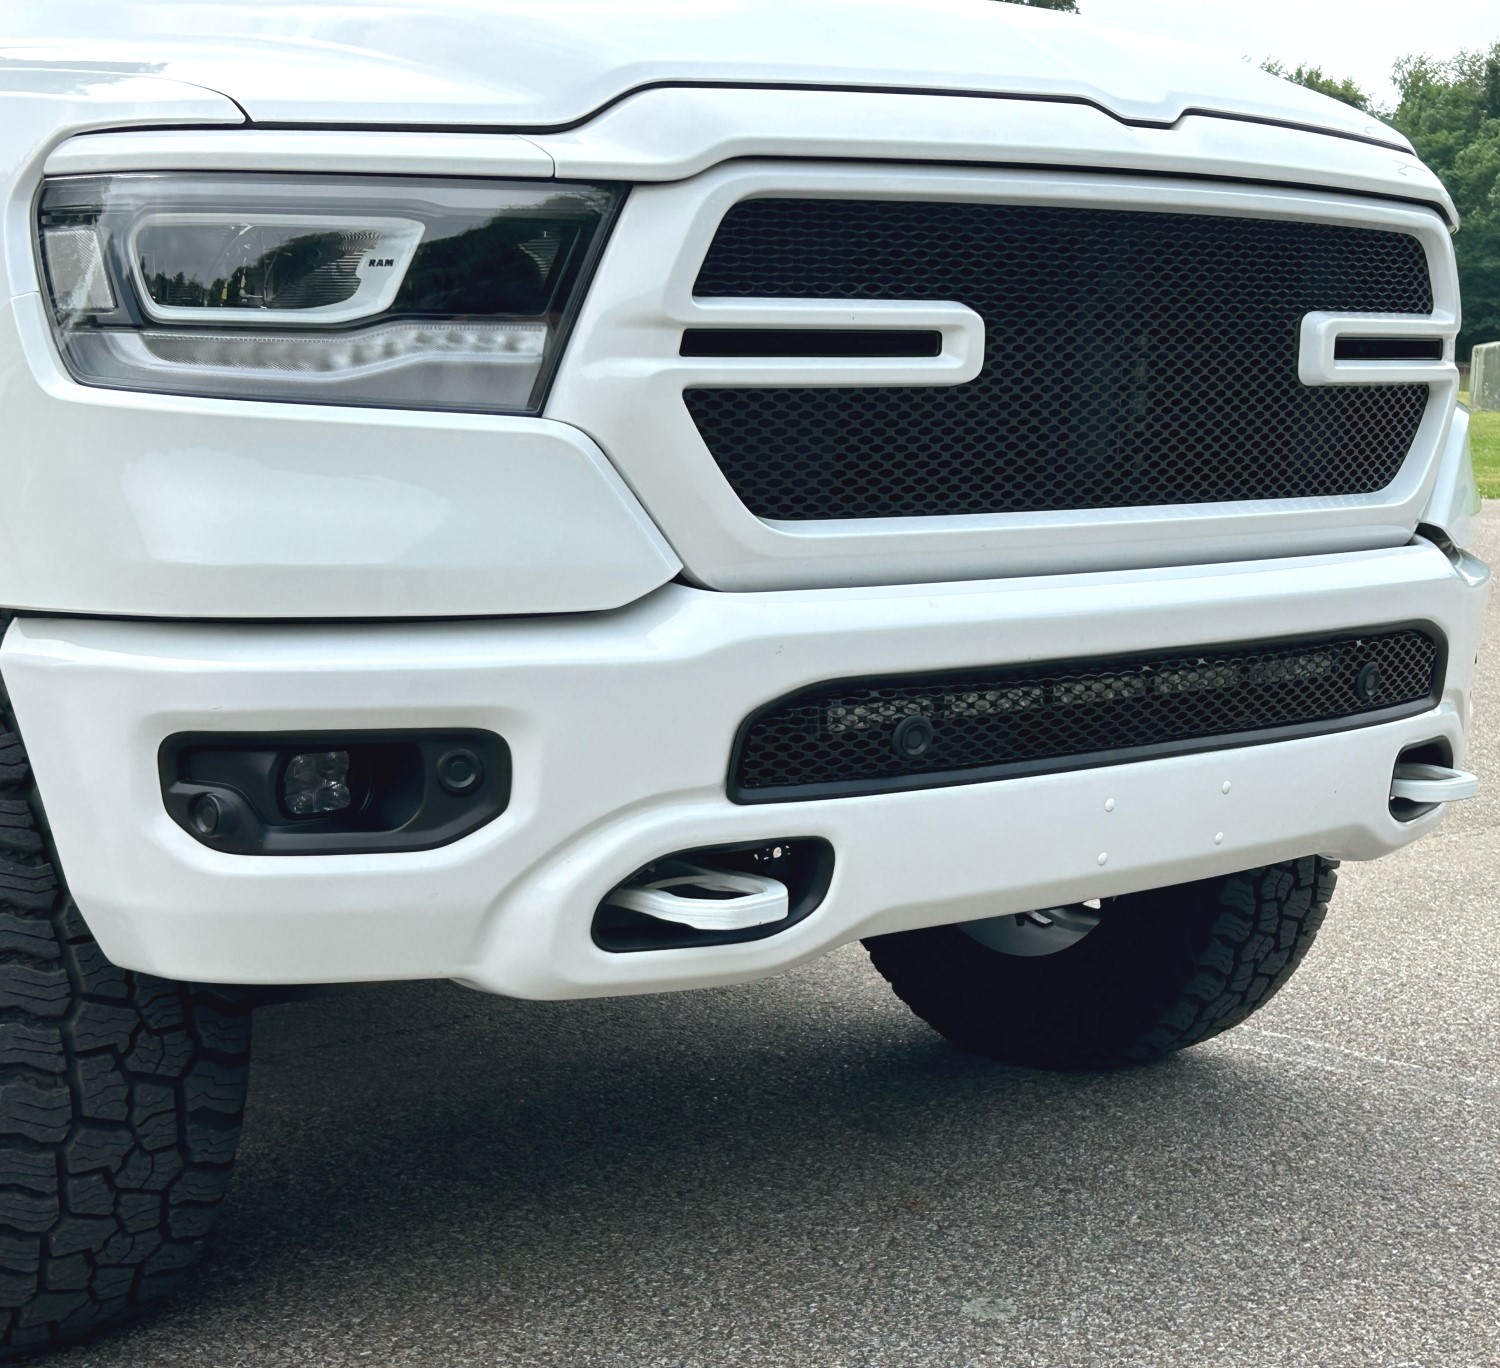 Repeat Customer for New Grille on Lower Bumper of 2019 Ram 1500 and Installs Bright New Lightbar